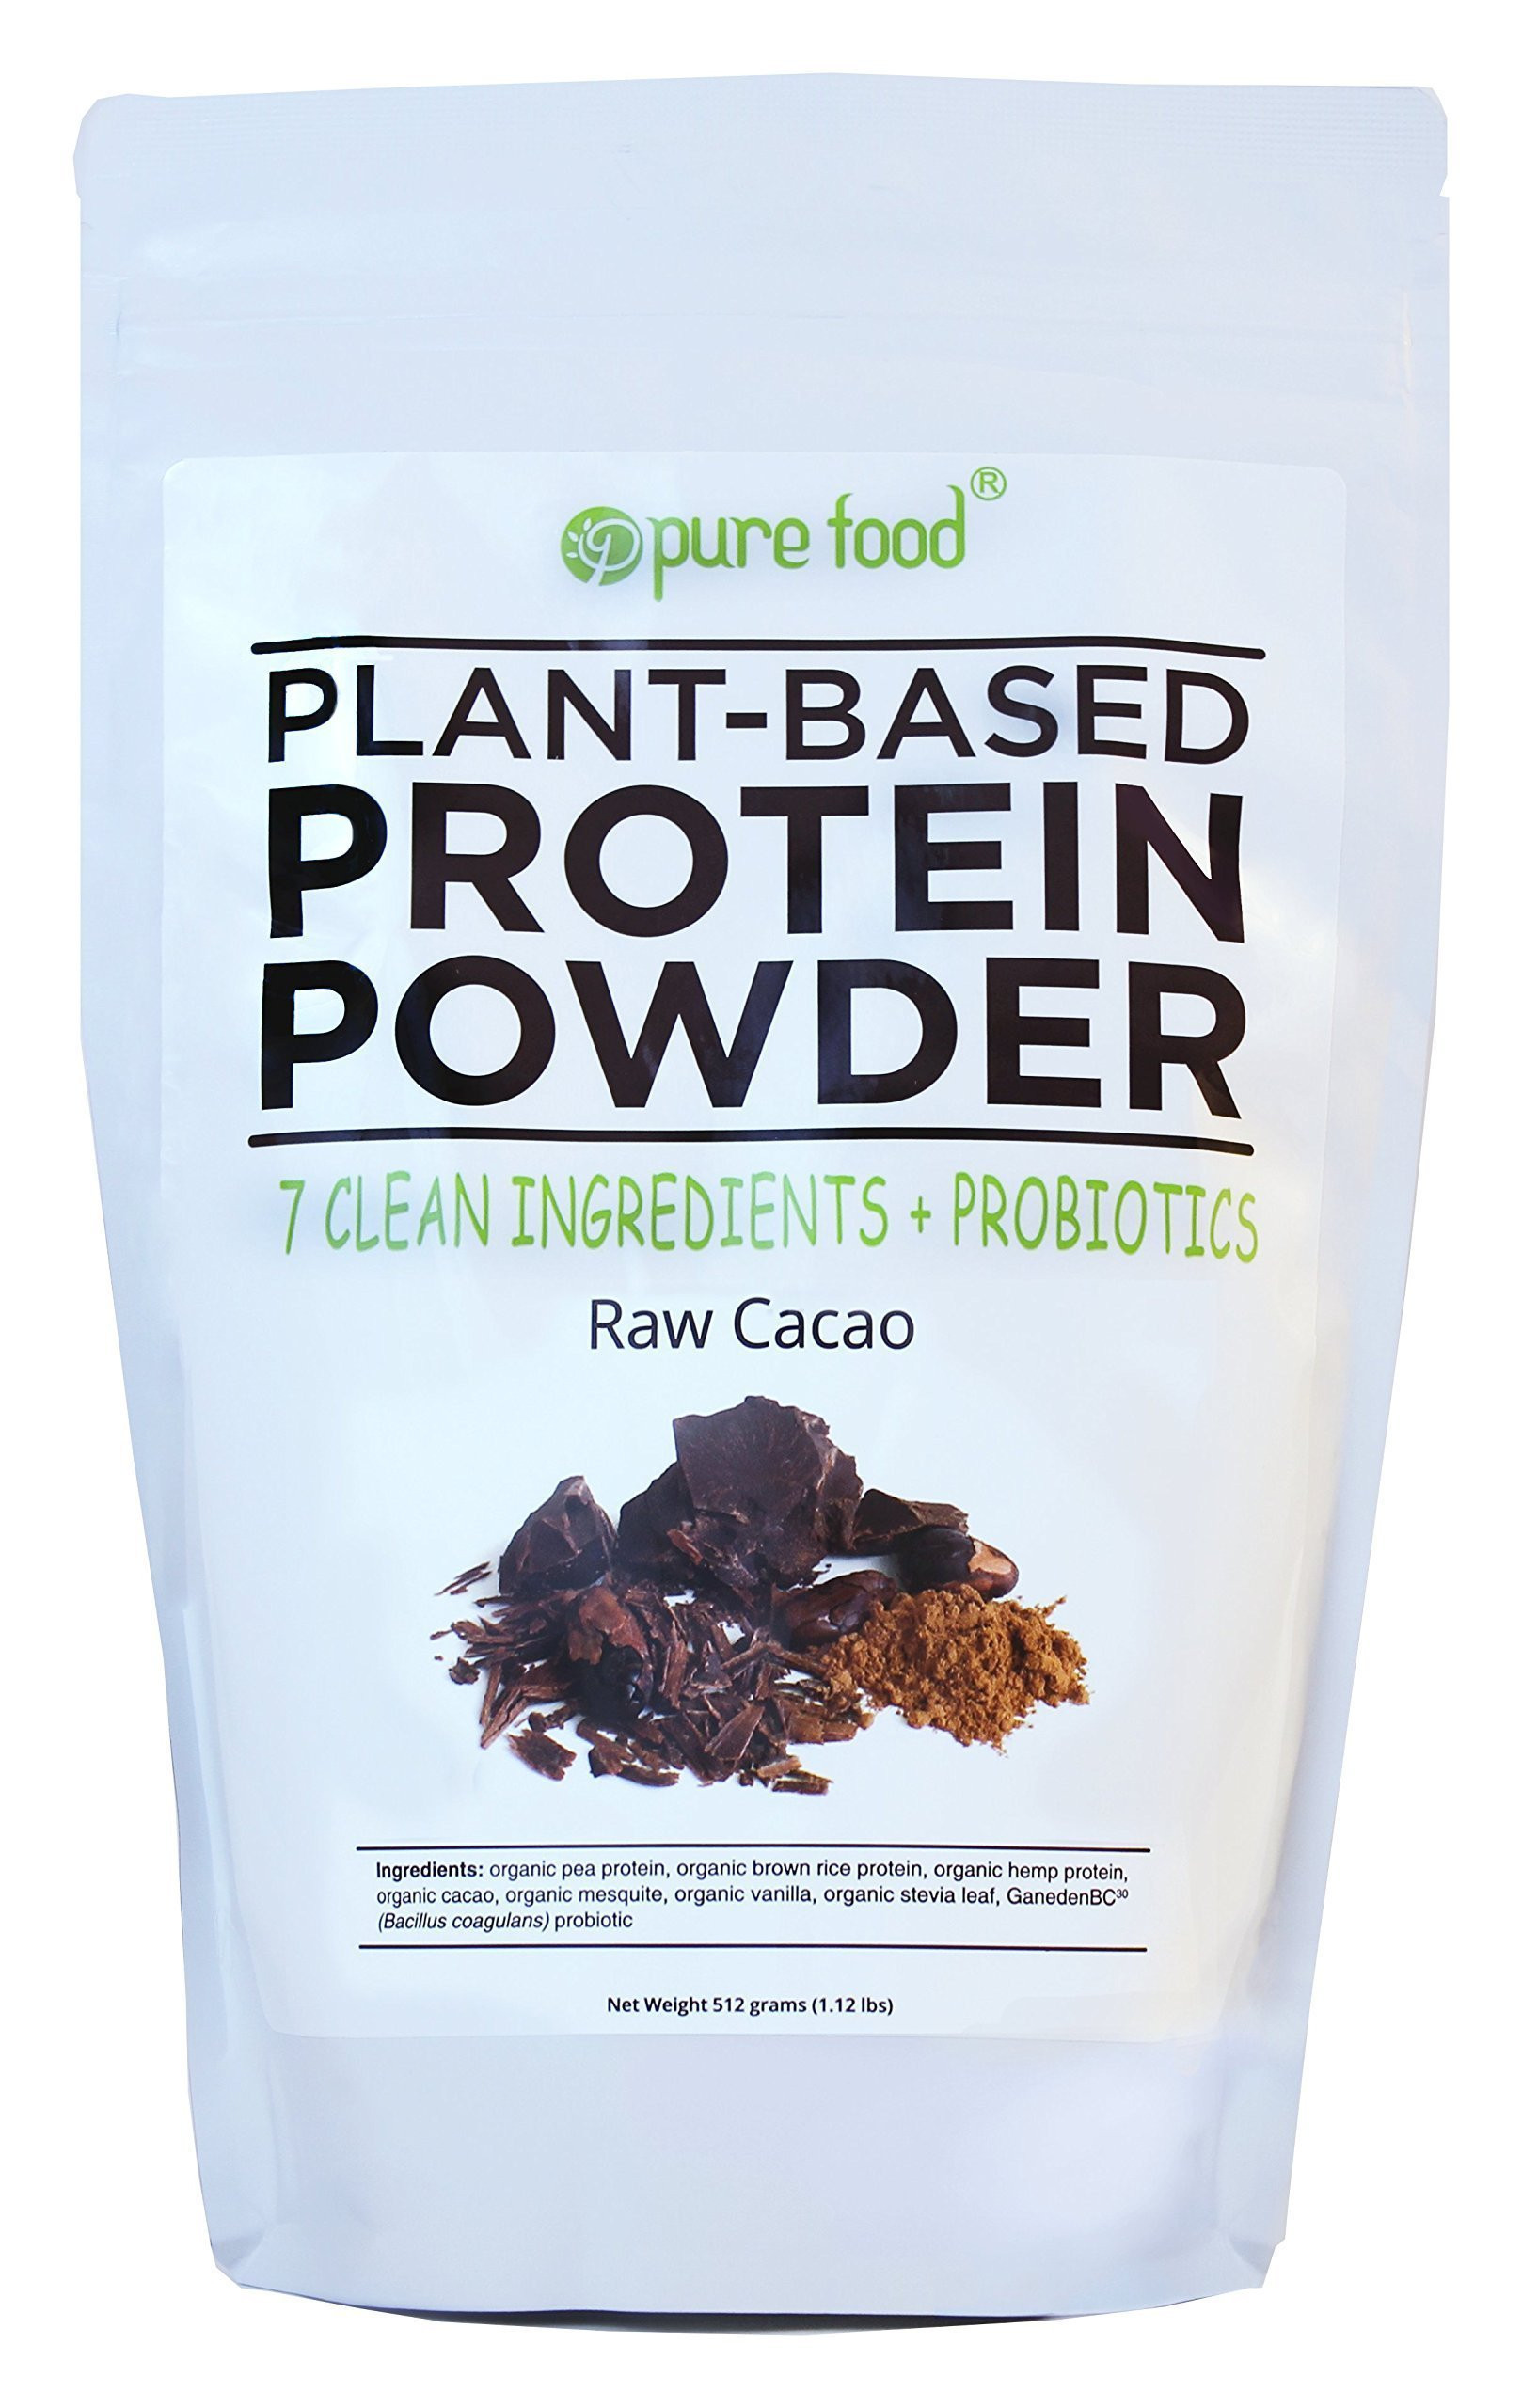 Whole Foods Vegetarian Protein Powder
 Amazon Pure Food The Healthiest Plant Based Protein